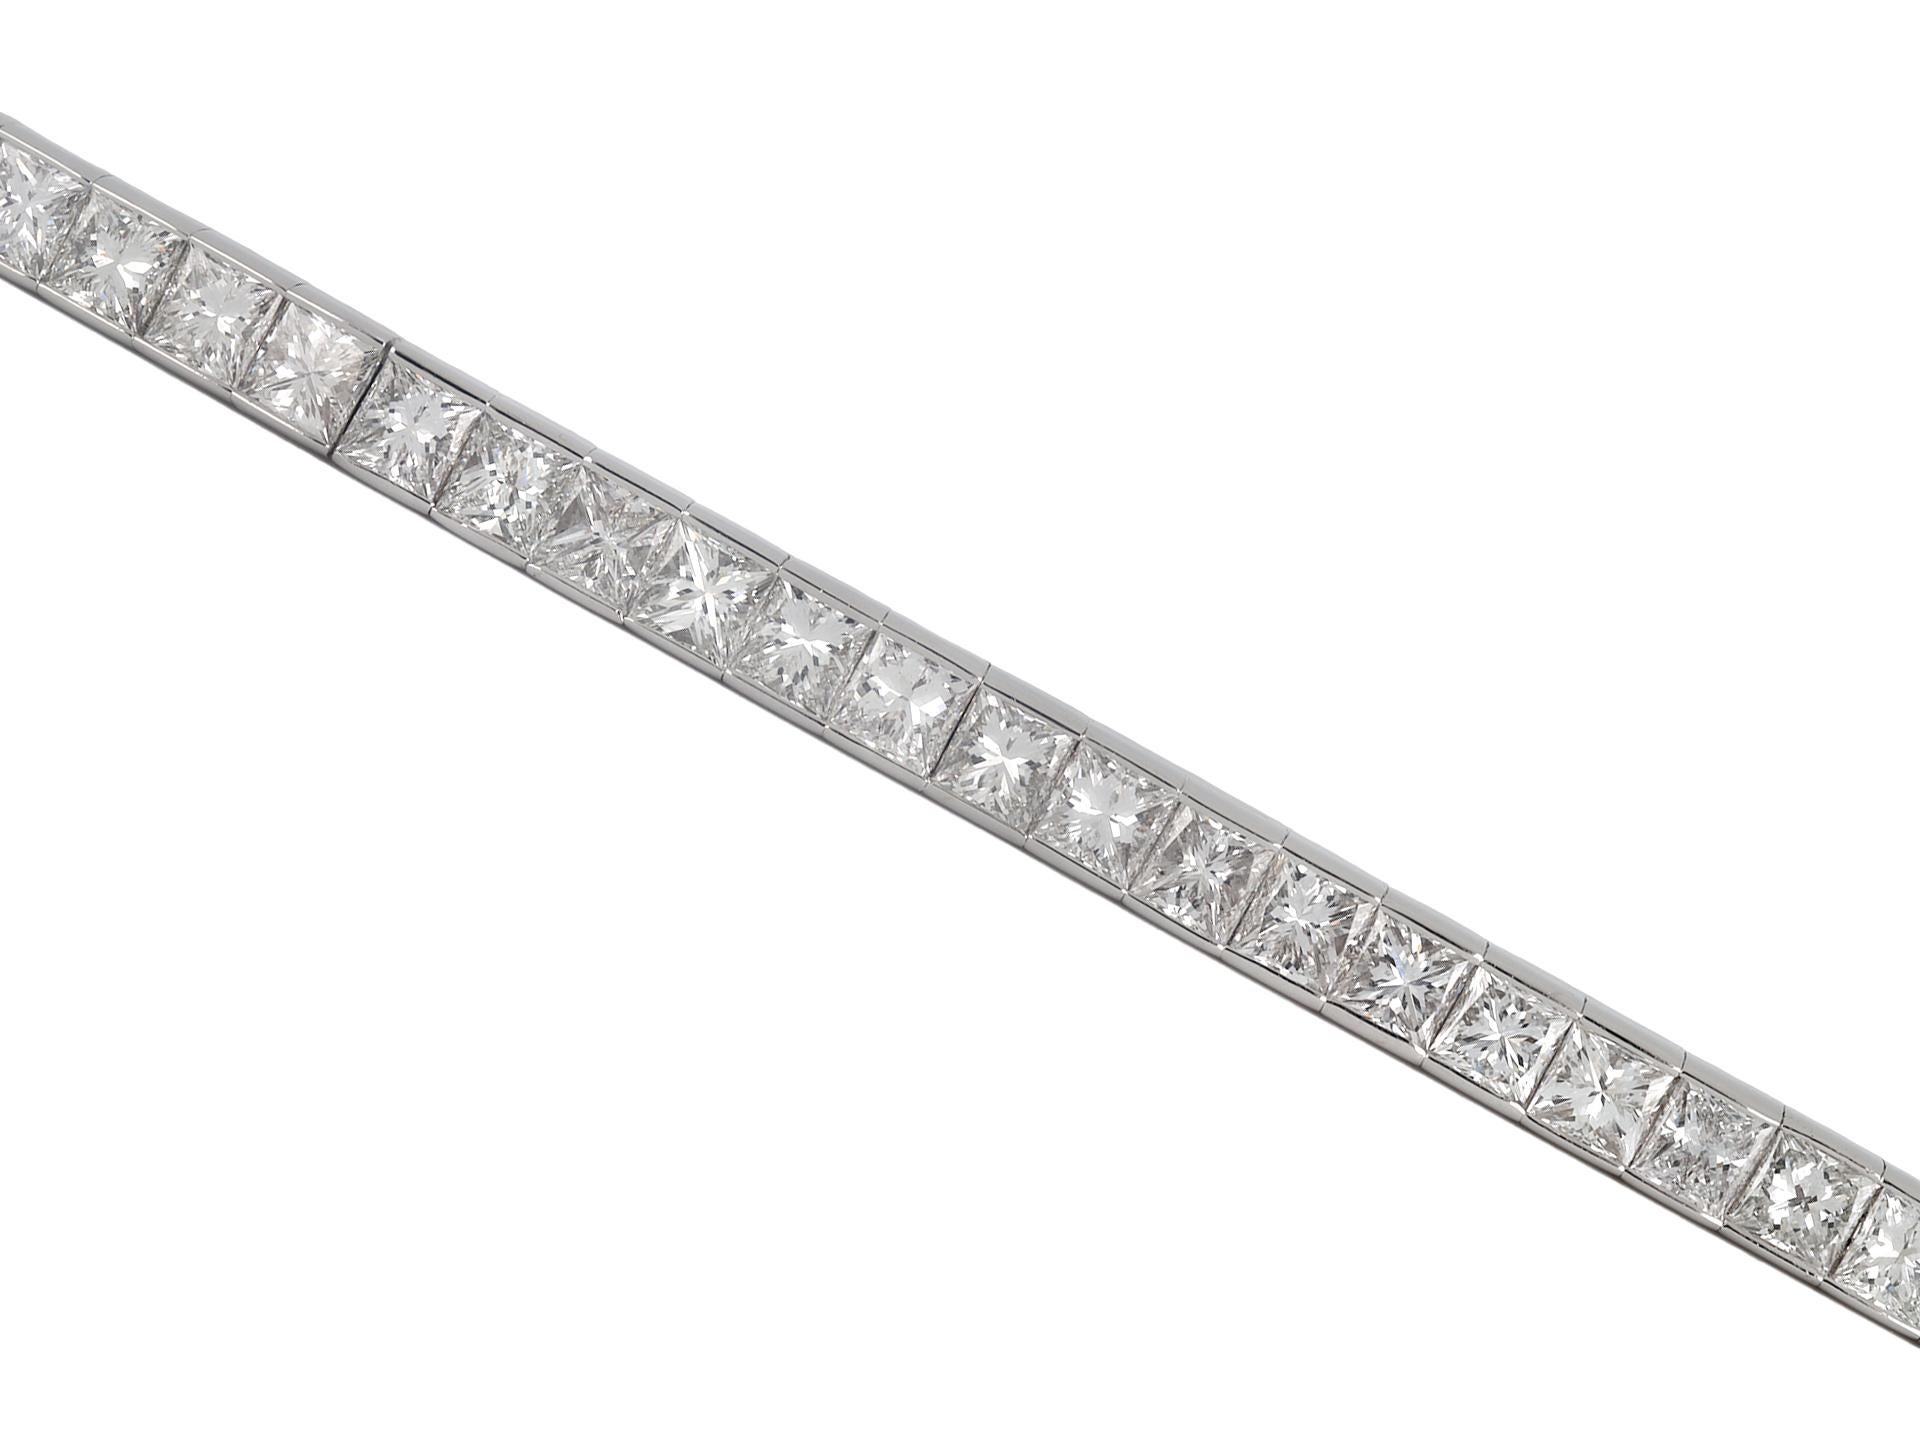 Diamond line bracelet. Set with forty four square radiant cut diamonds in open back rubover settings with a combined approximate weight of 17.60 carats, to a striking articulated line bracelet, flowing with movement, featuring polished edges, an